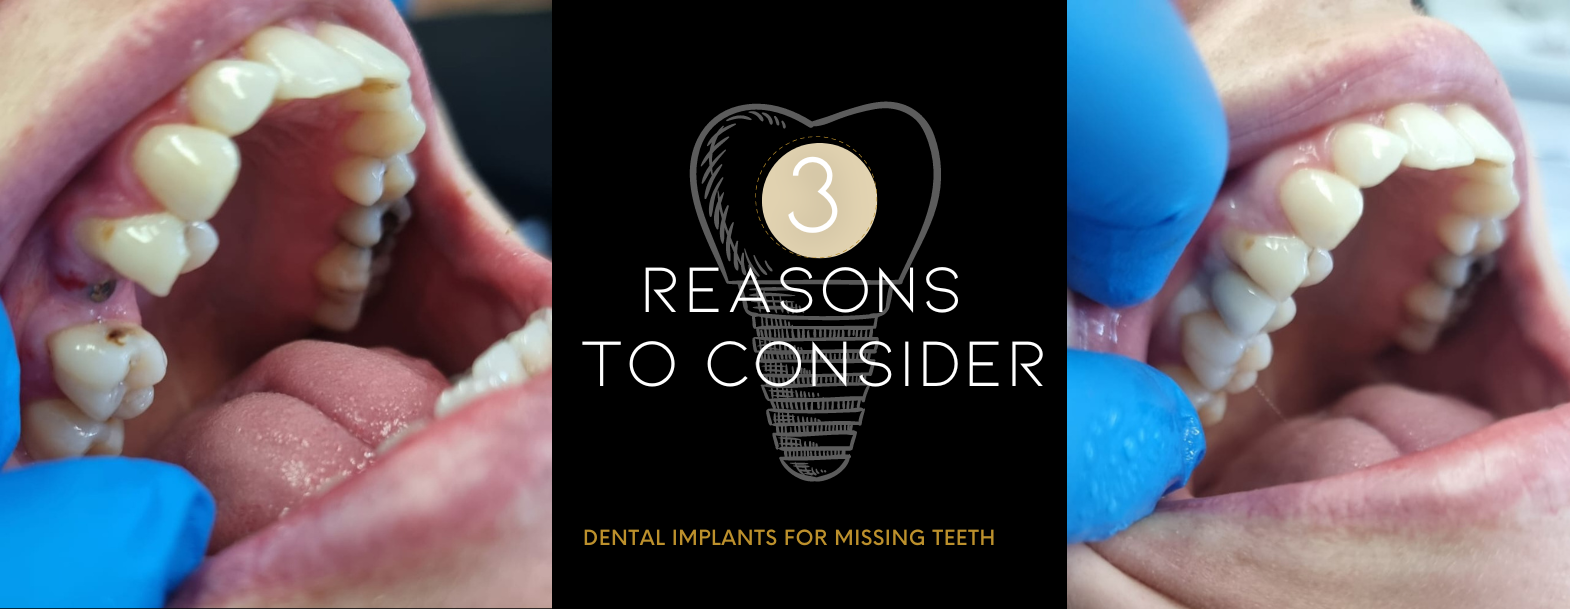 3 reasons to consider dental implants